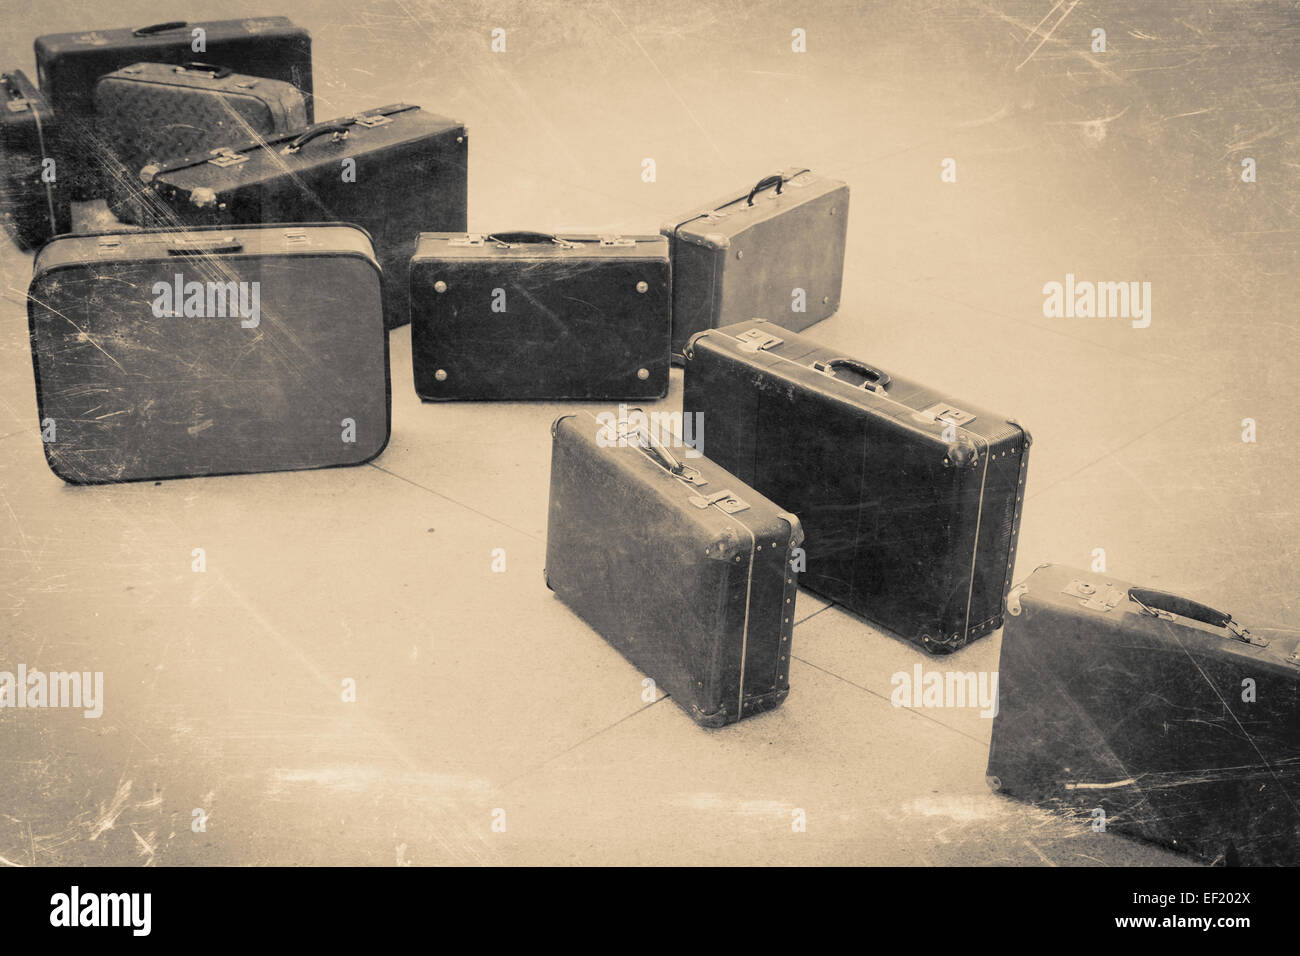 group of vintage suitcase on tiled floor, retro stylized in black and white color photo Stock Photo